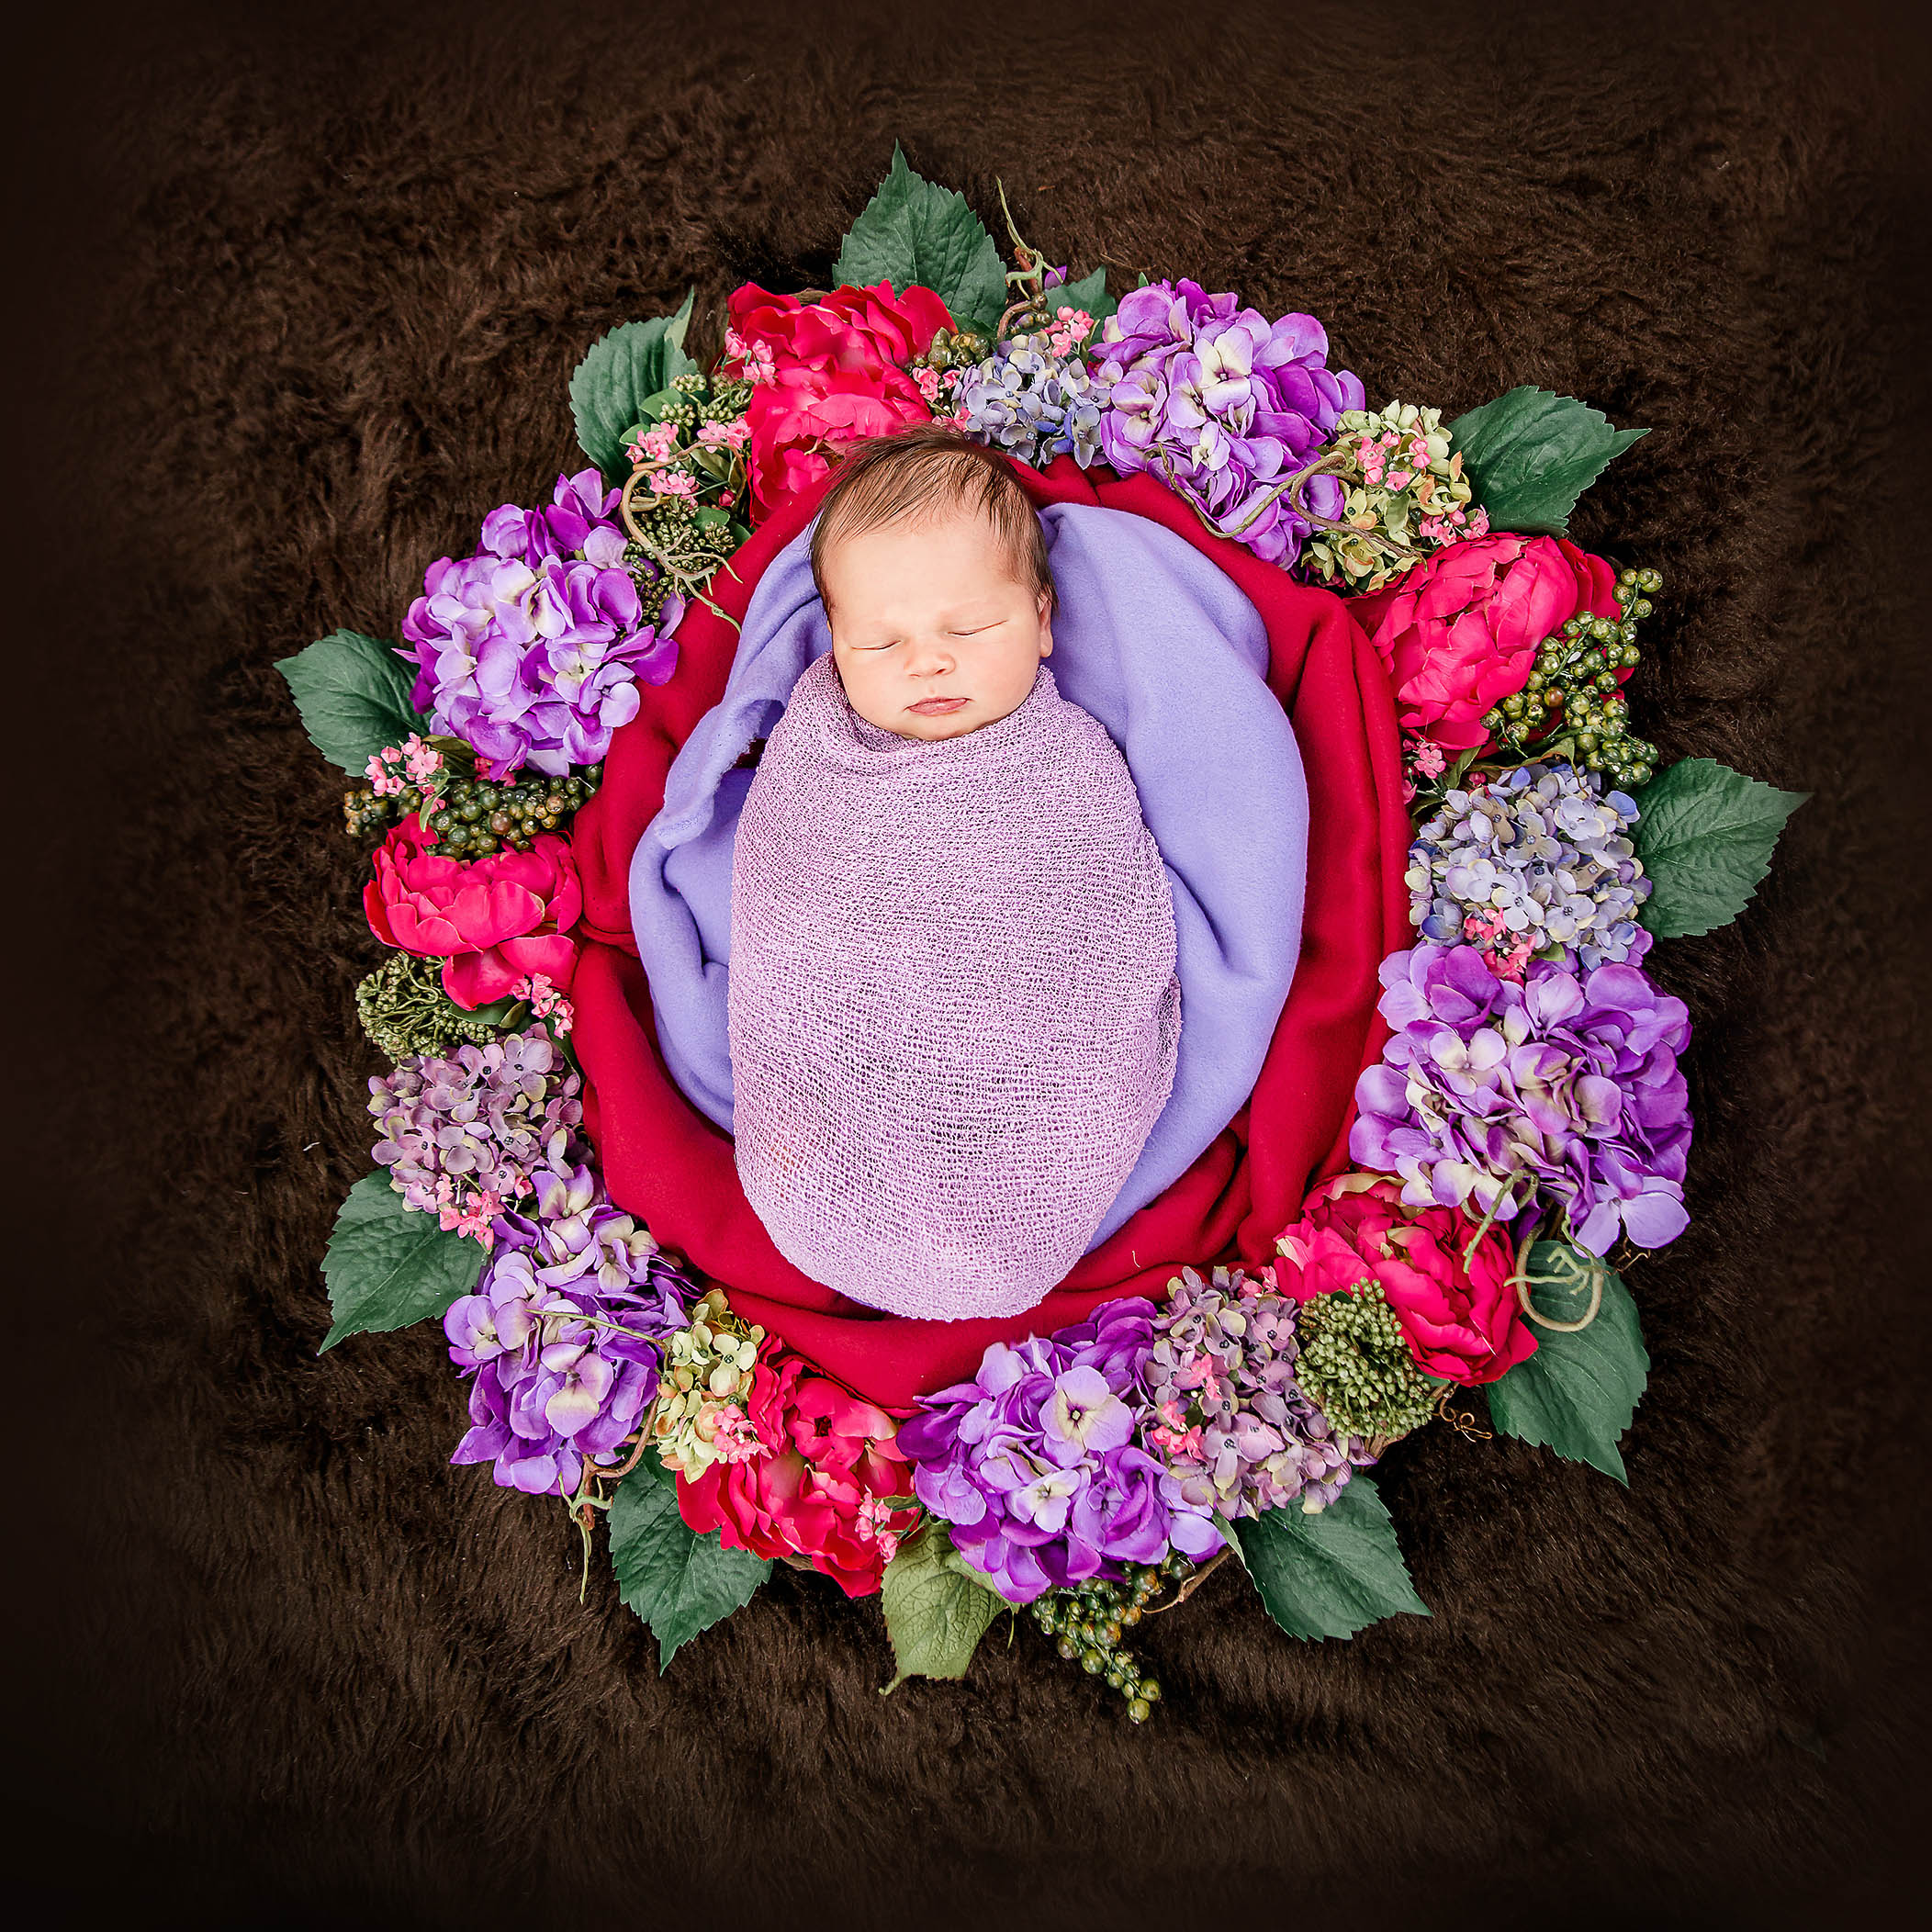 4 day old newborn girl swaddled in a floral wreath of dark pink and lavender flowers